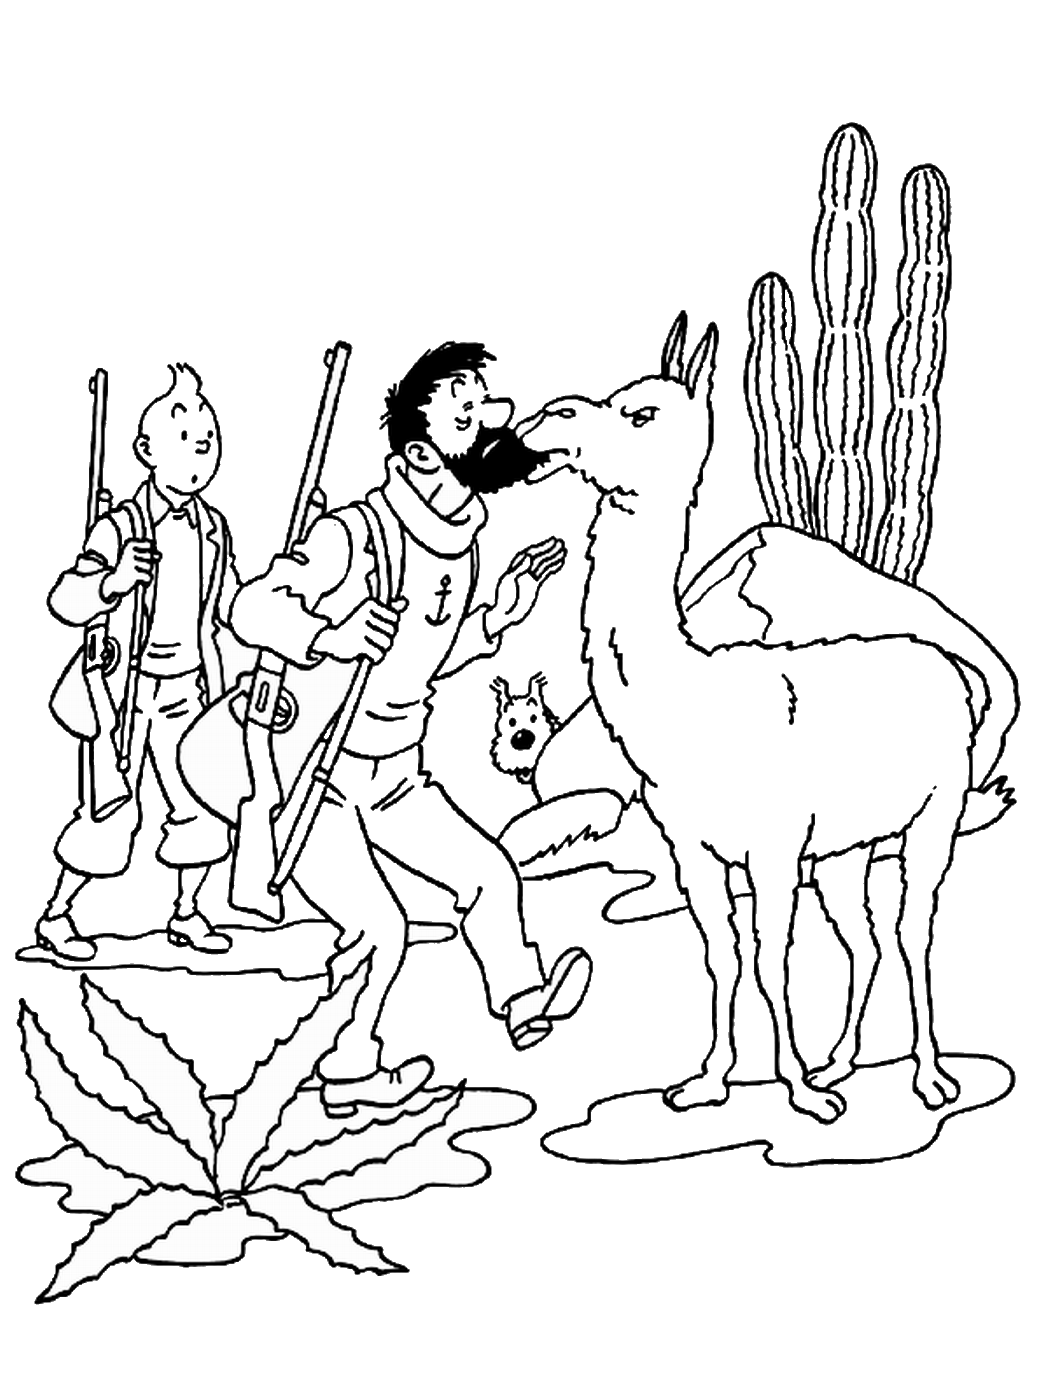 Tintin Coloring Pages Cartoons tintin_cl_18 Printable 2020 6713 Coloring4free